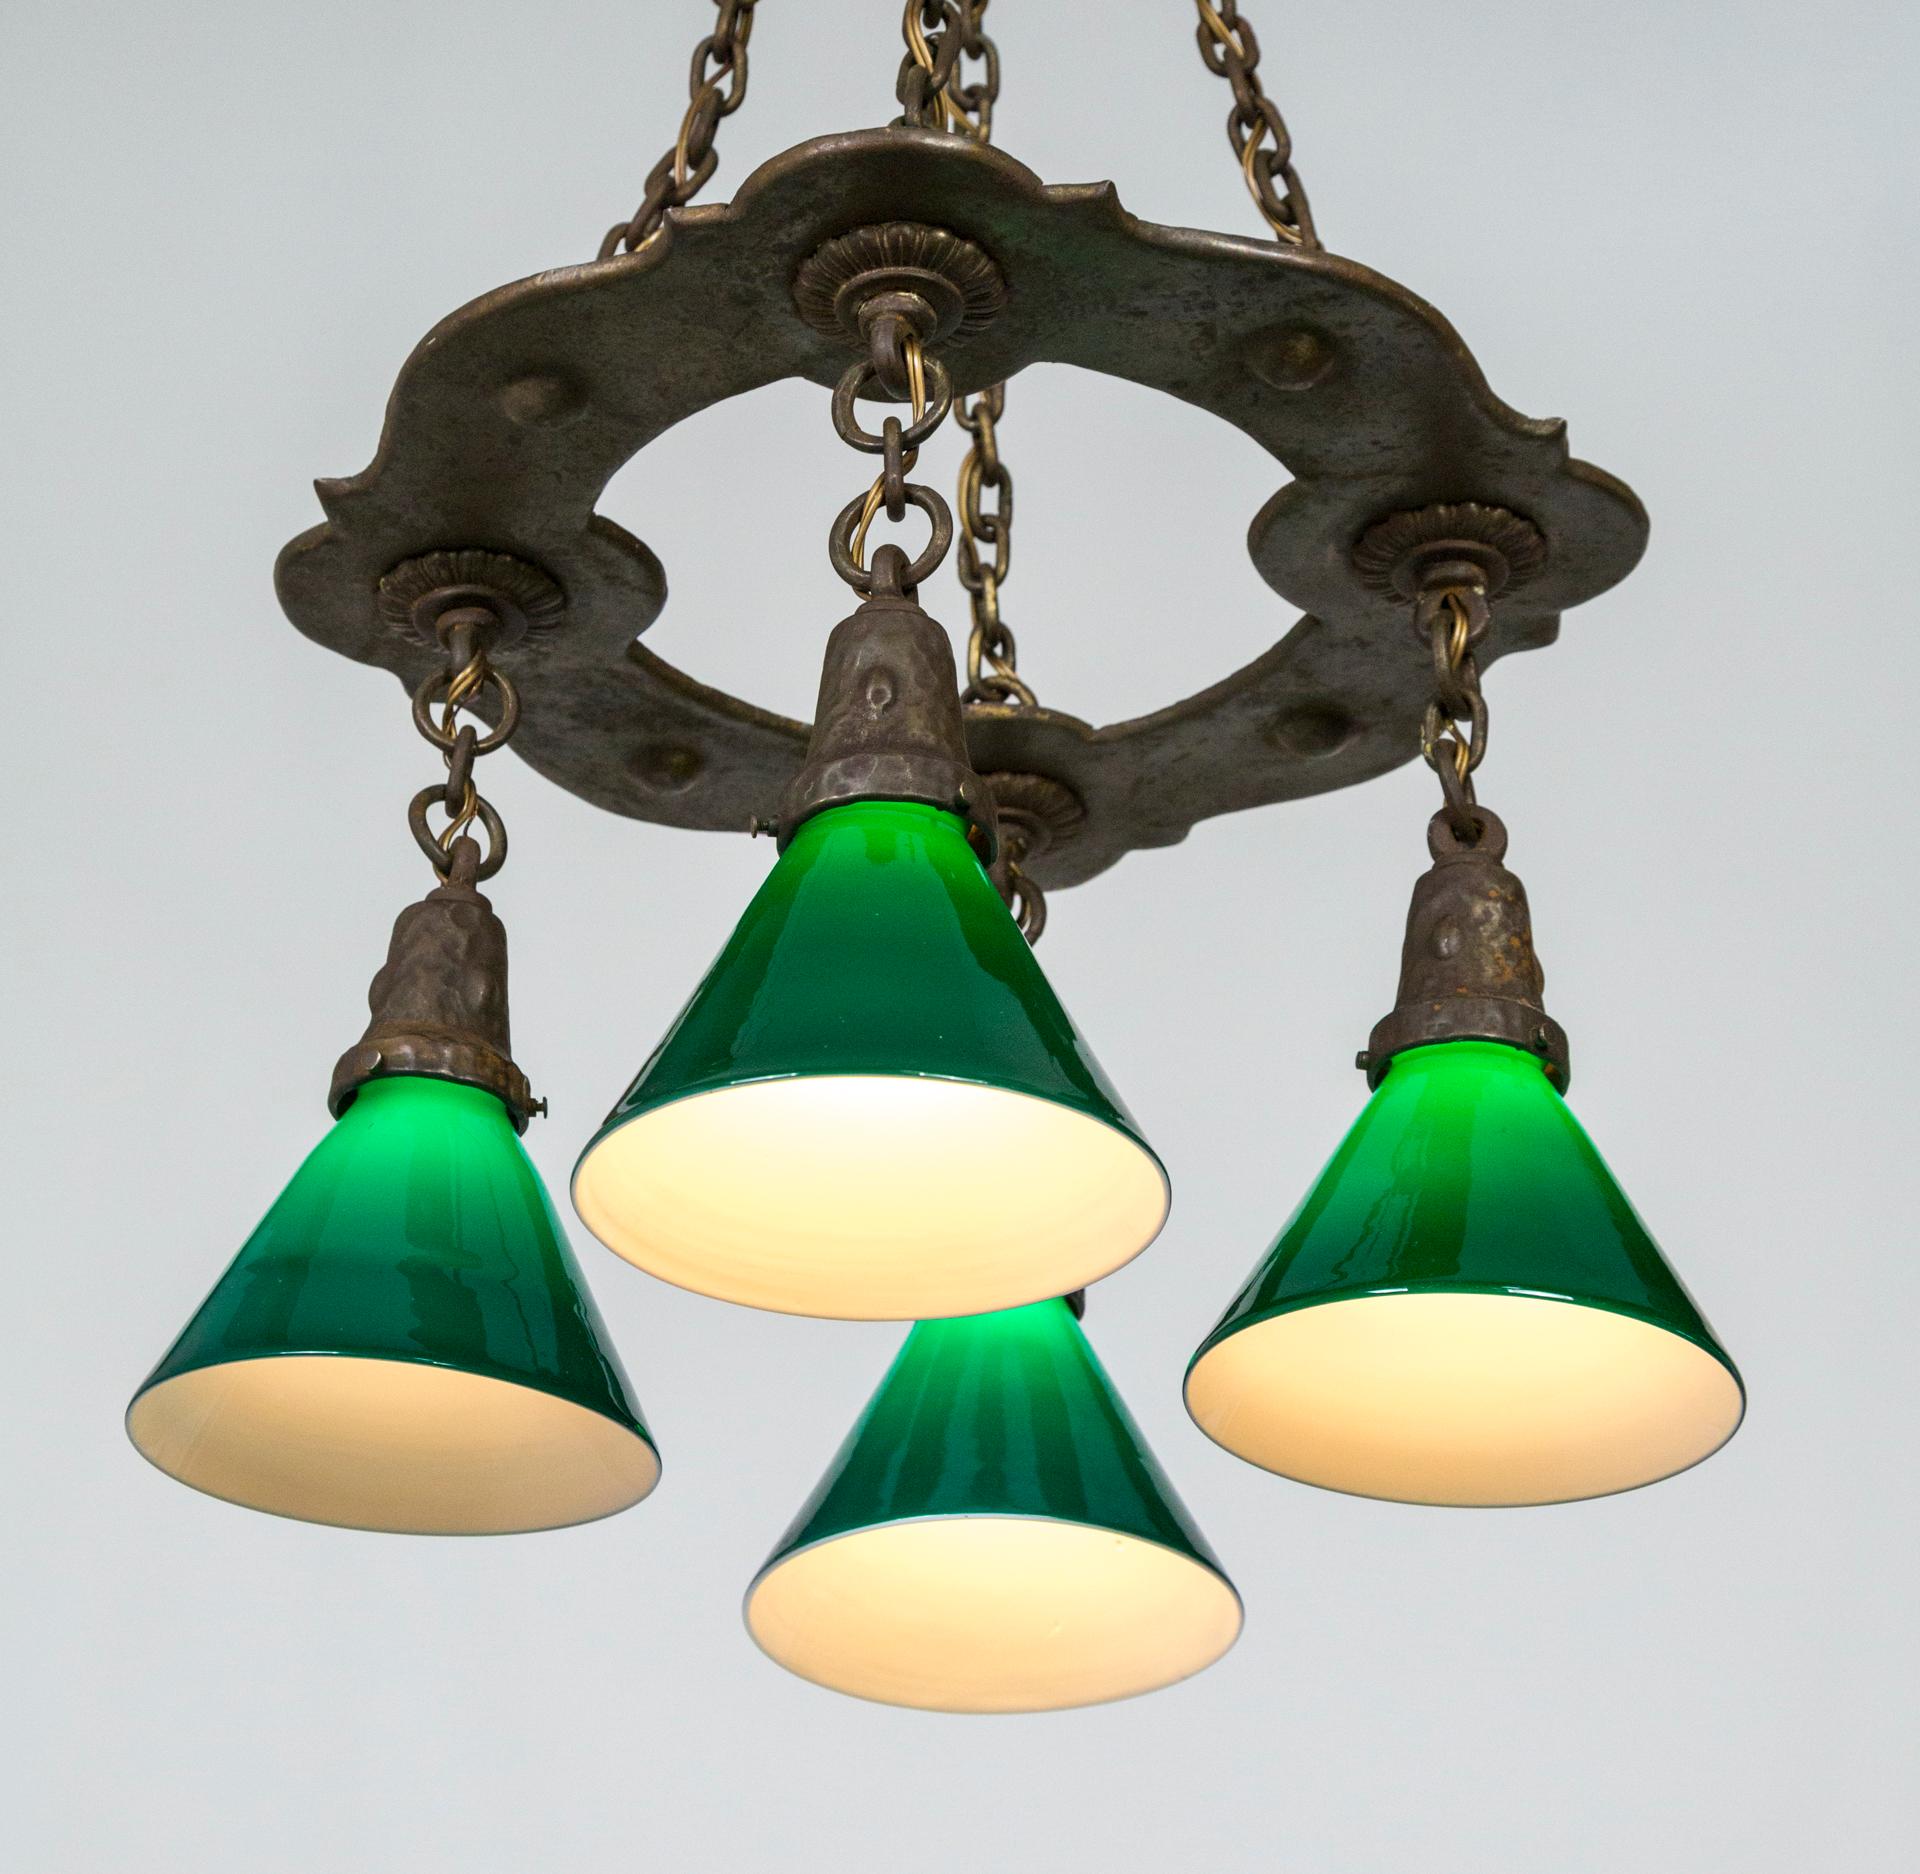 Arts and Crafts Arts & Crafts Hammered Darkened Metal Chandelier with Green Glass Shades For Sale